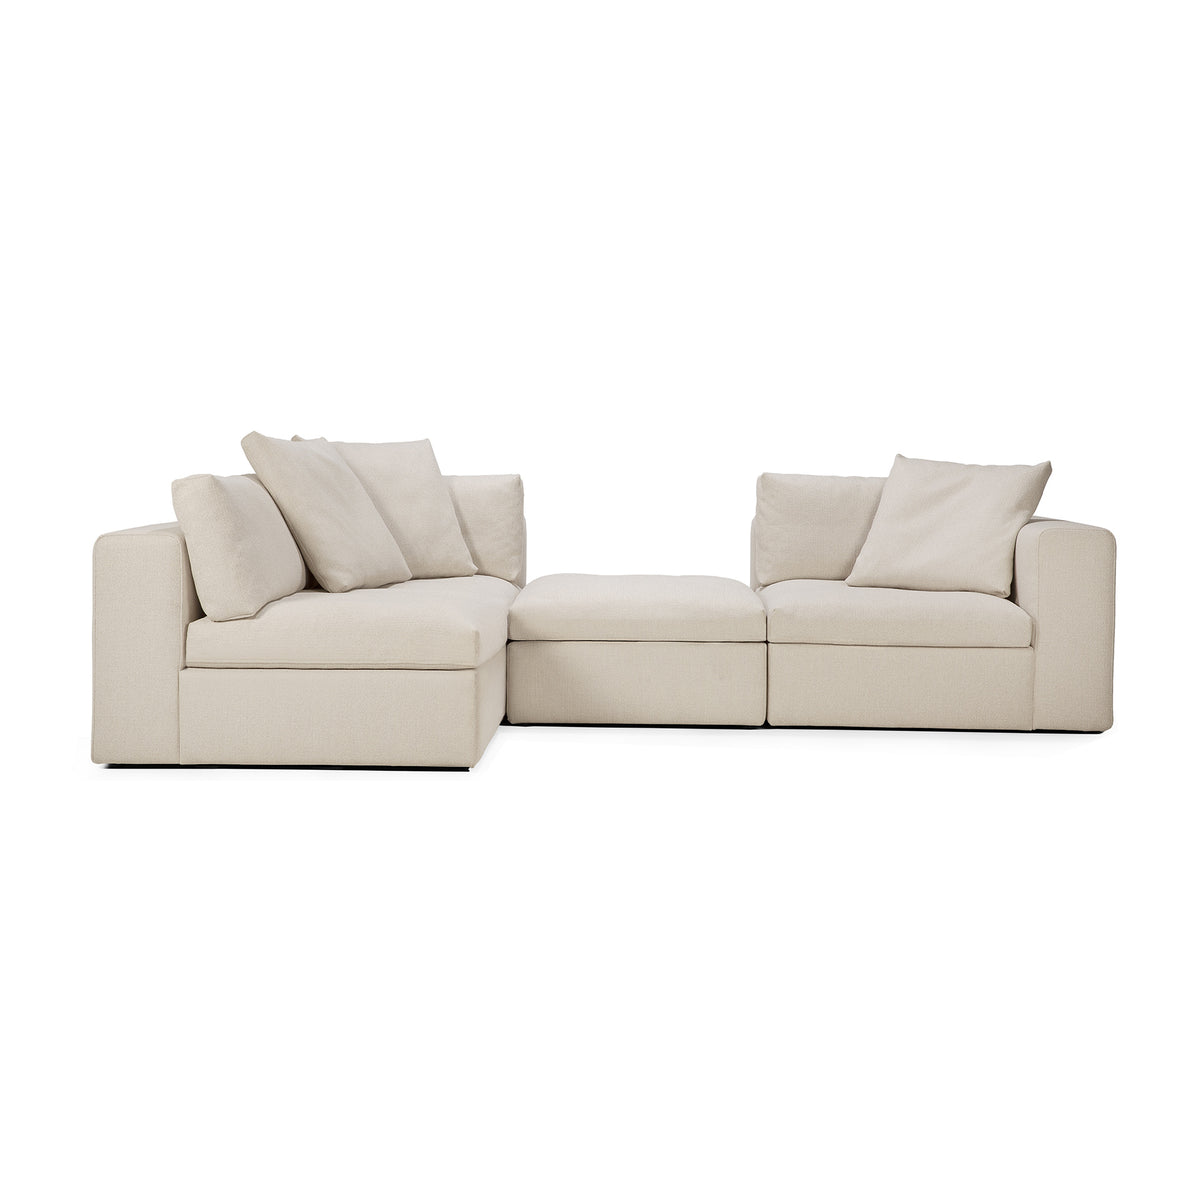 Ethnicraft Mellow Sectional Sofa Center Back Open with Throw Cushions